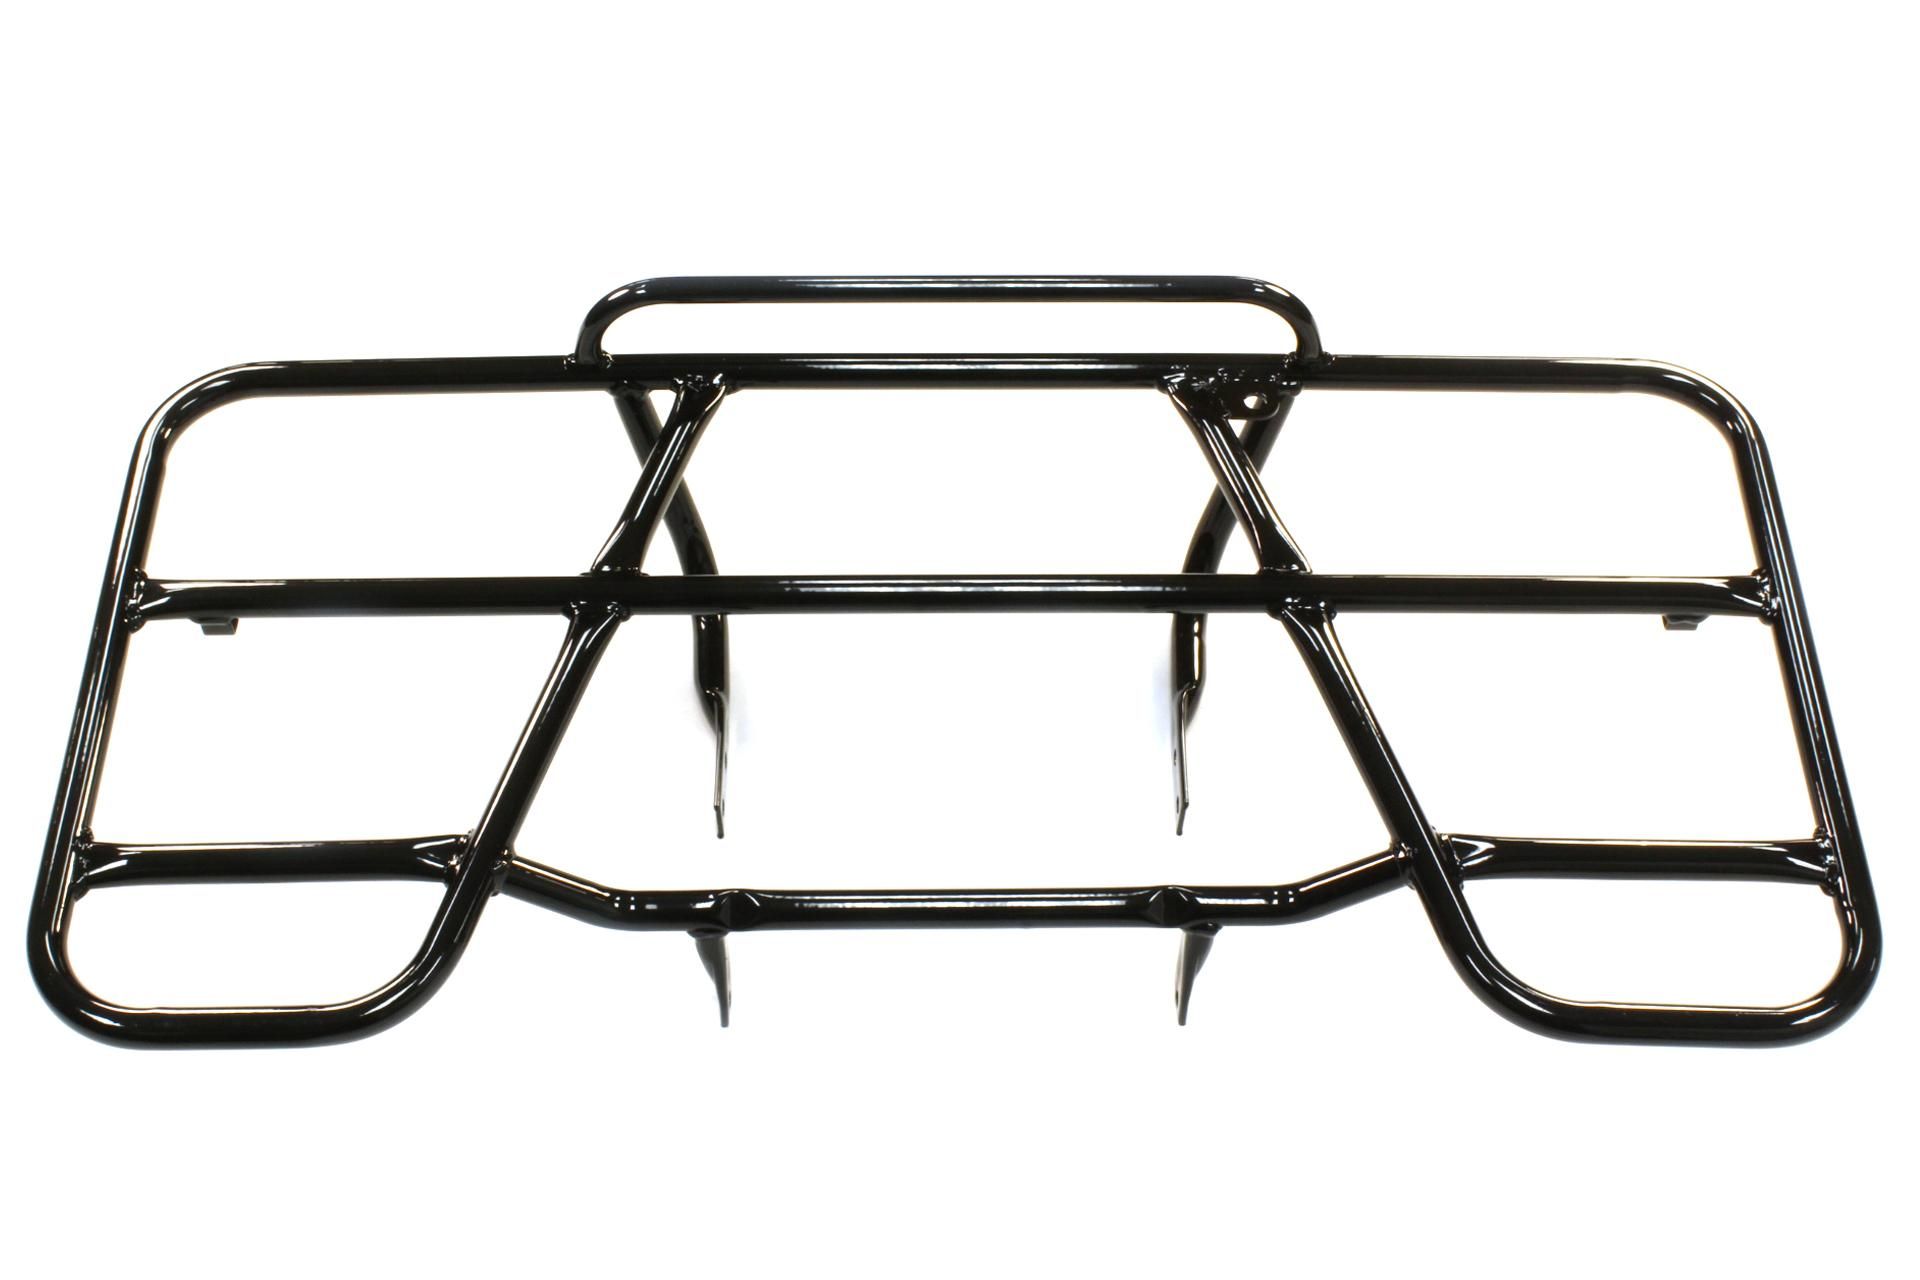 81300-HN5-670 LUGGAGE CARRIER